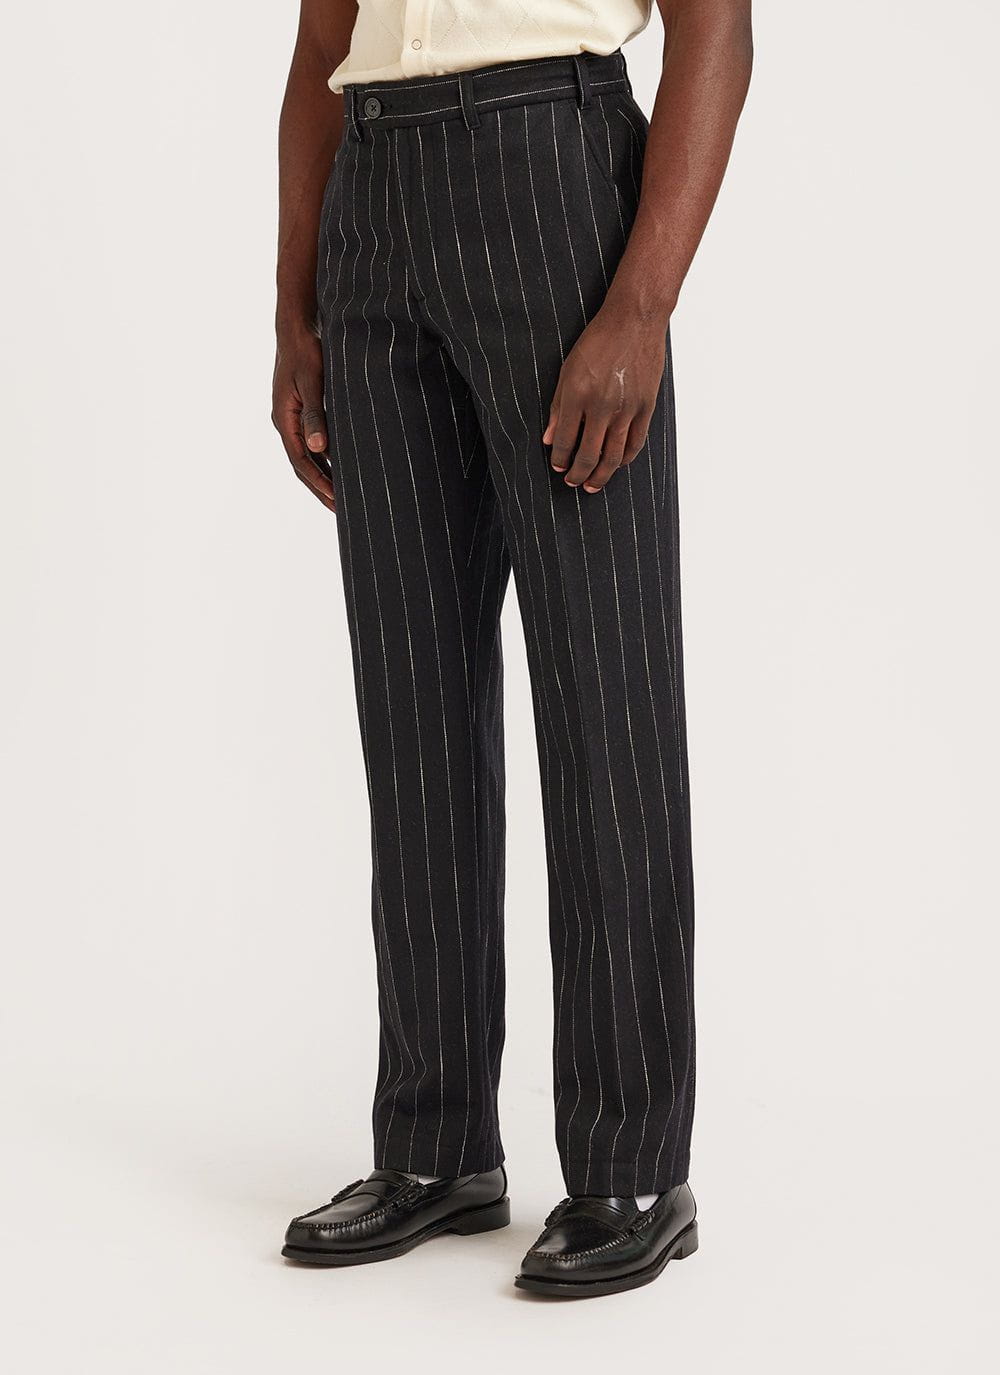 Striped Business Dress Pants For Men Formal And Casual Office And Wedding Mens  Pinstripe Trousers 210527 From Dou04, $25.91 | DHgate.Com